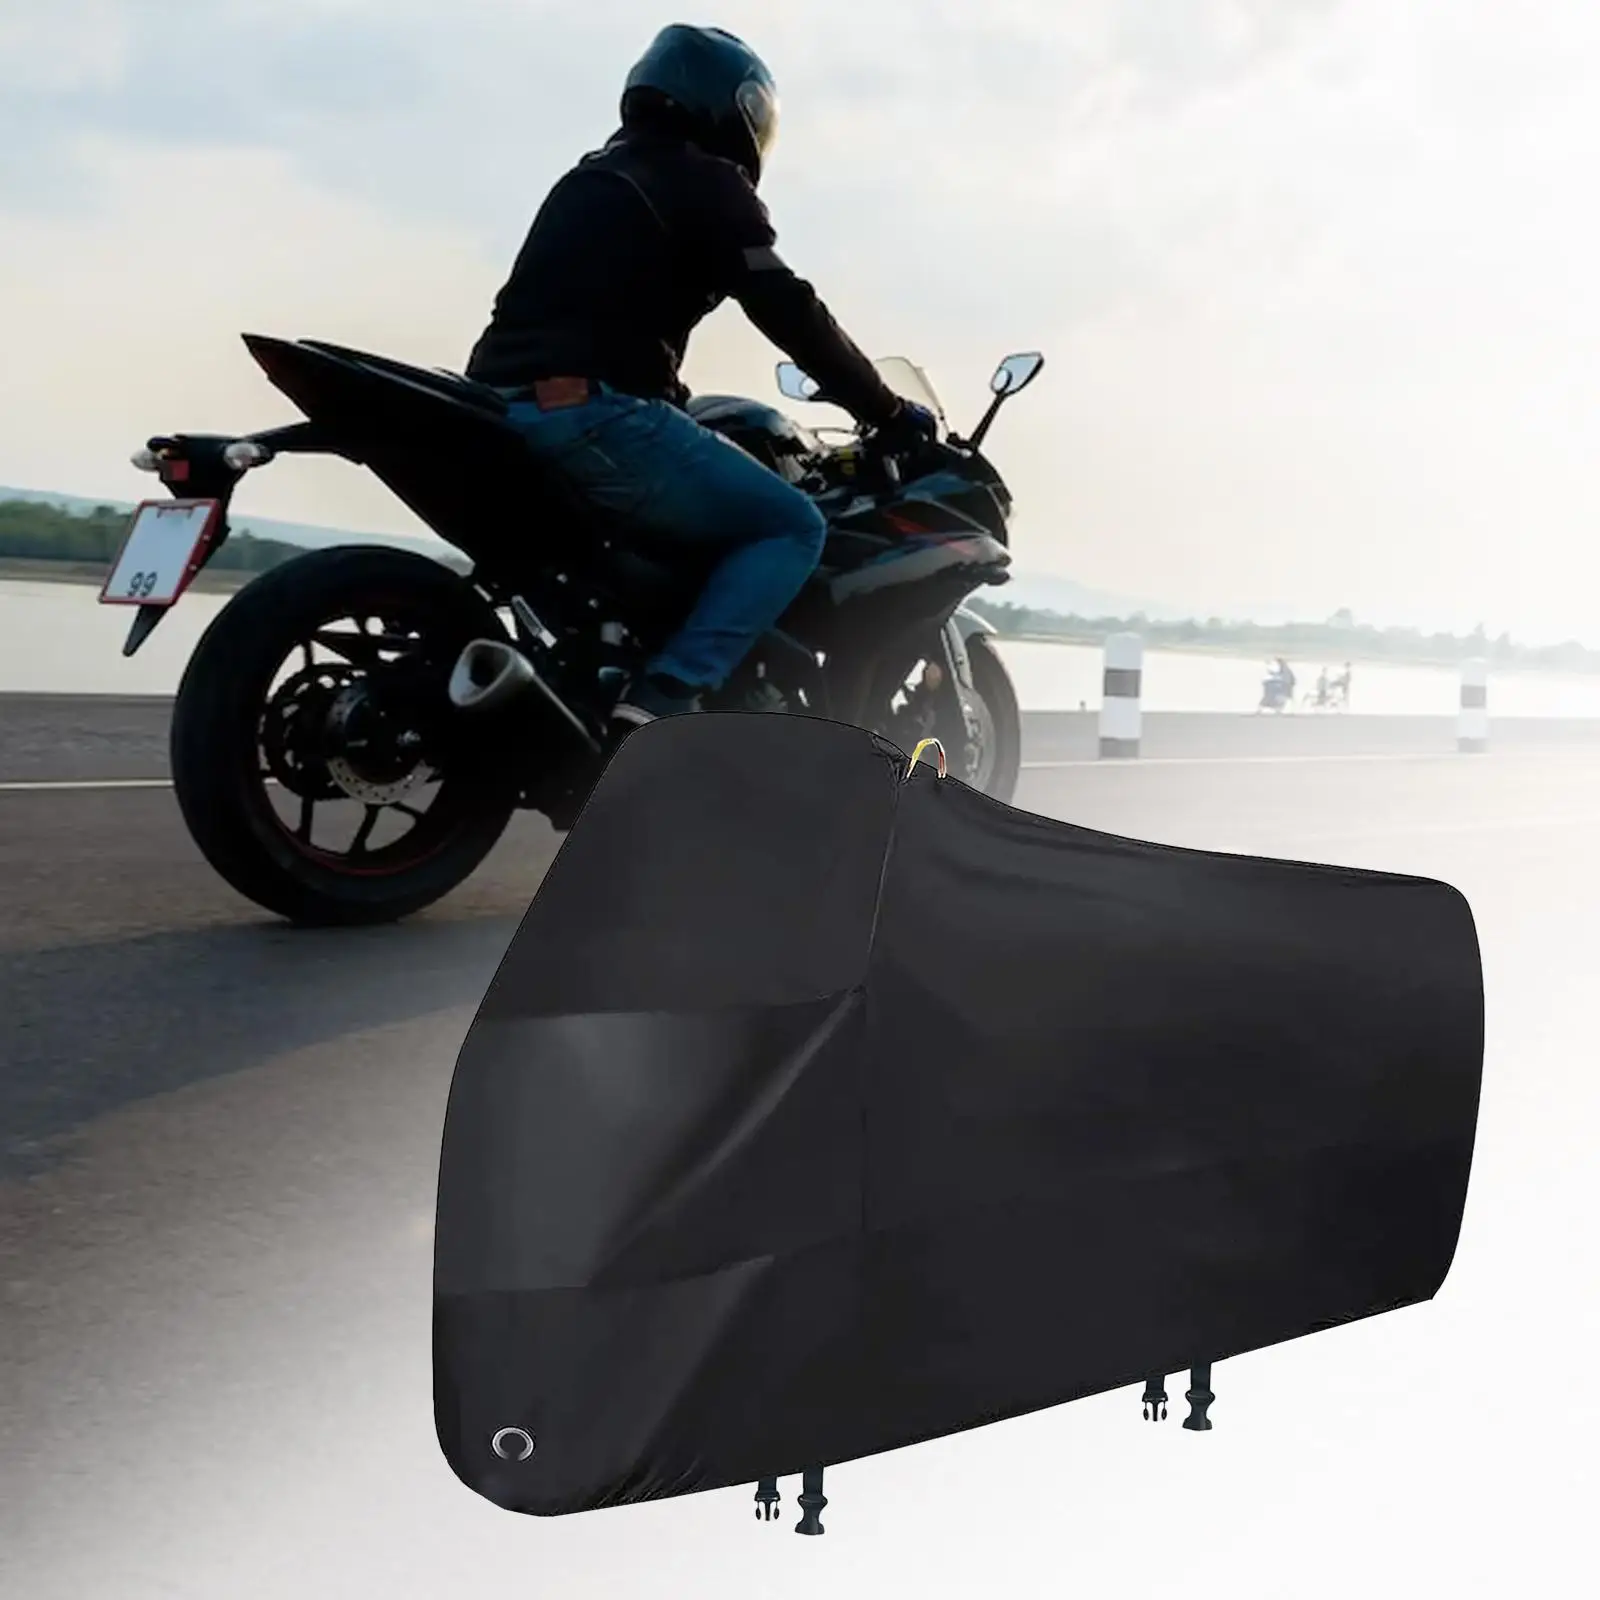 Scooter Mopeds Cover Motorcycle Protective Cover 200x70x110cm Black Accessory with 2 Buckle Multifunctional Tear Resistant